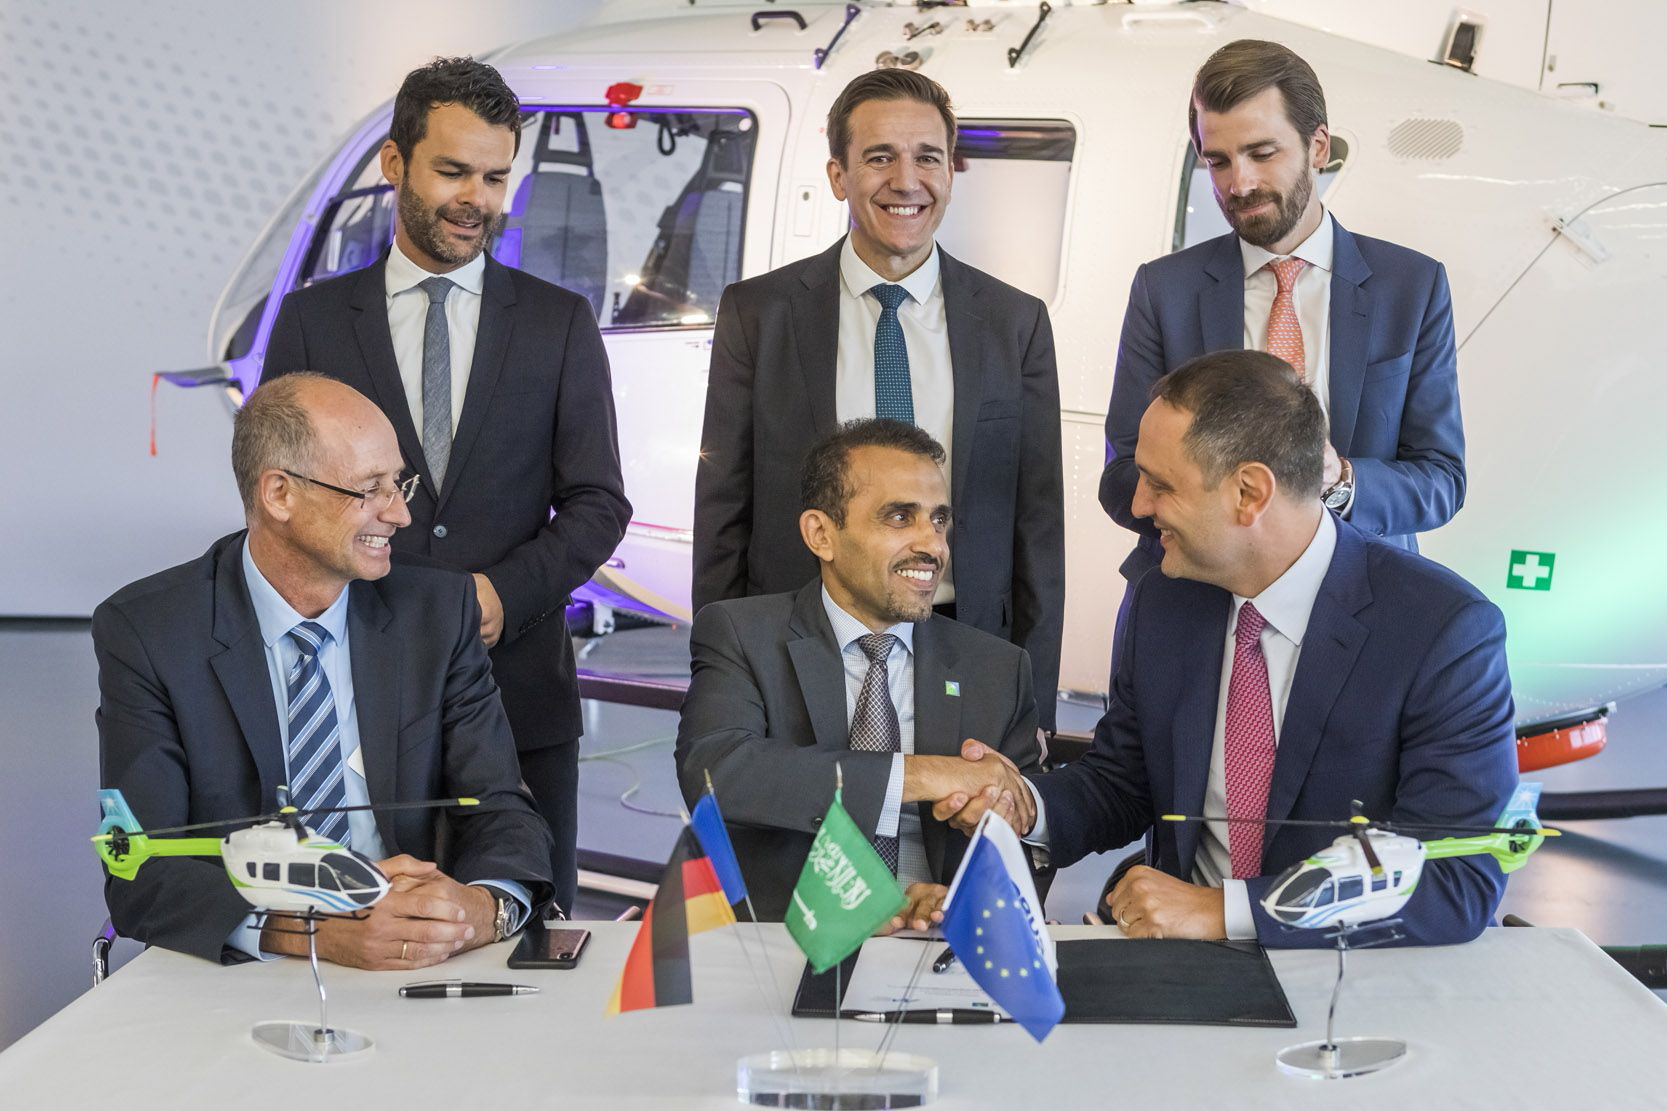 Front row, from left to right: Wolfgang Schoder (CEO of Airbus Helicopters Deutschland), Abdulhakim Gohi (Vice President of Industrial Services, Aramco) and Daniel Rosenthal (CEO of Milestone Aviation). Back row, from left to right: Alexis Vidal (Airbus Helicopters Vice President of Sales - Oil & Gas and Leasing), Michael York (Milestone Aviation Vice President of Sales - Middle East, Africa, India) and Charles Simpson (Airbus Helicopters Head of Sales - Middle East). Click to enlarge.